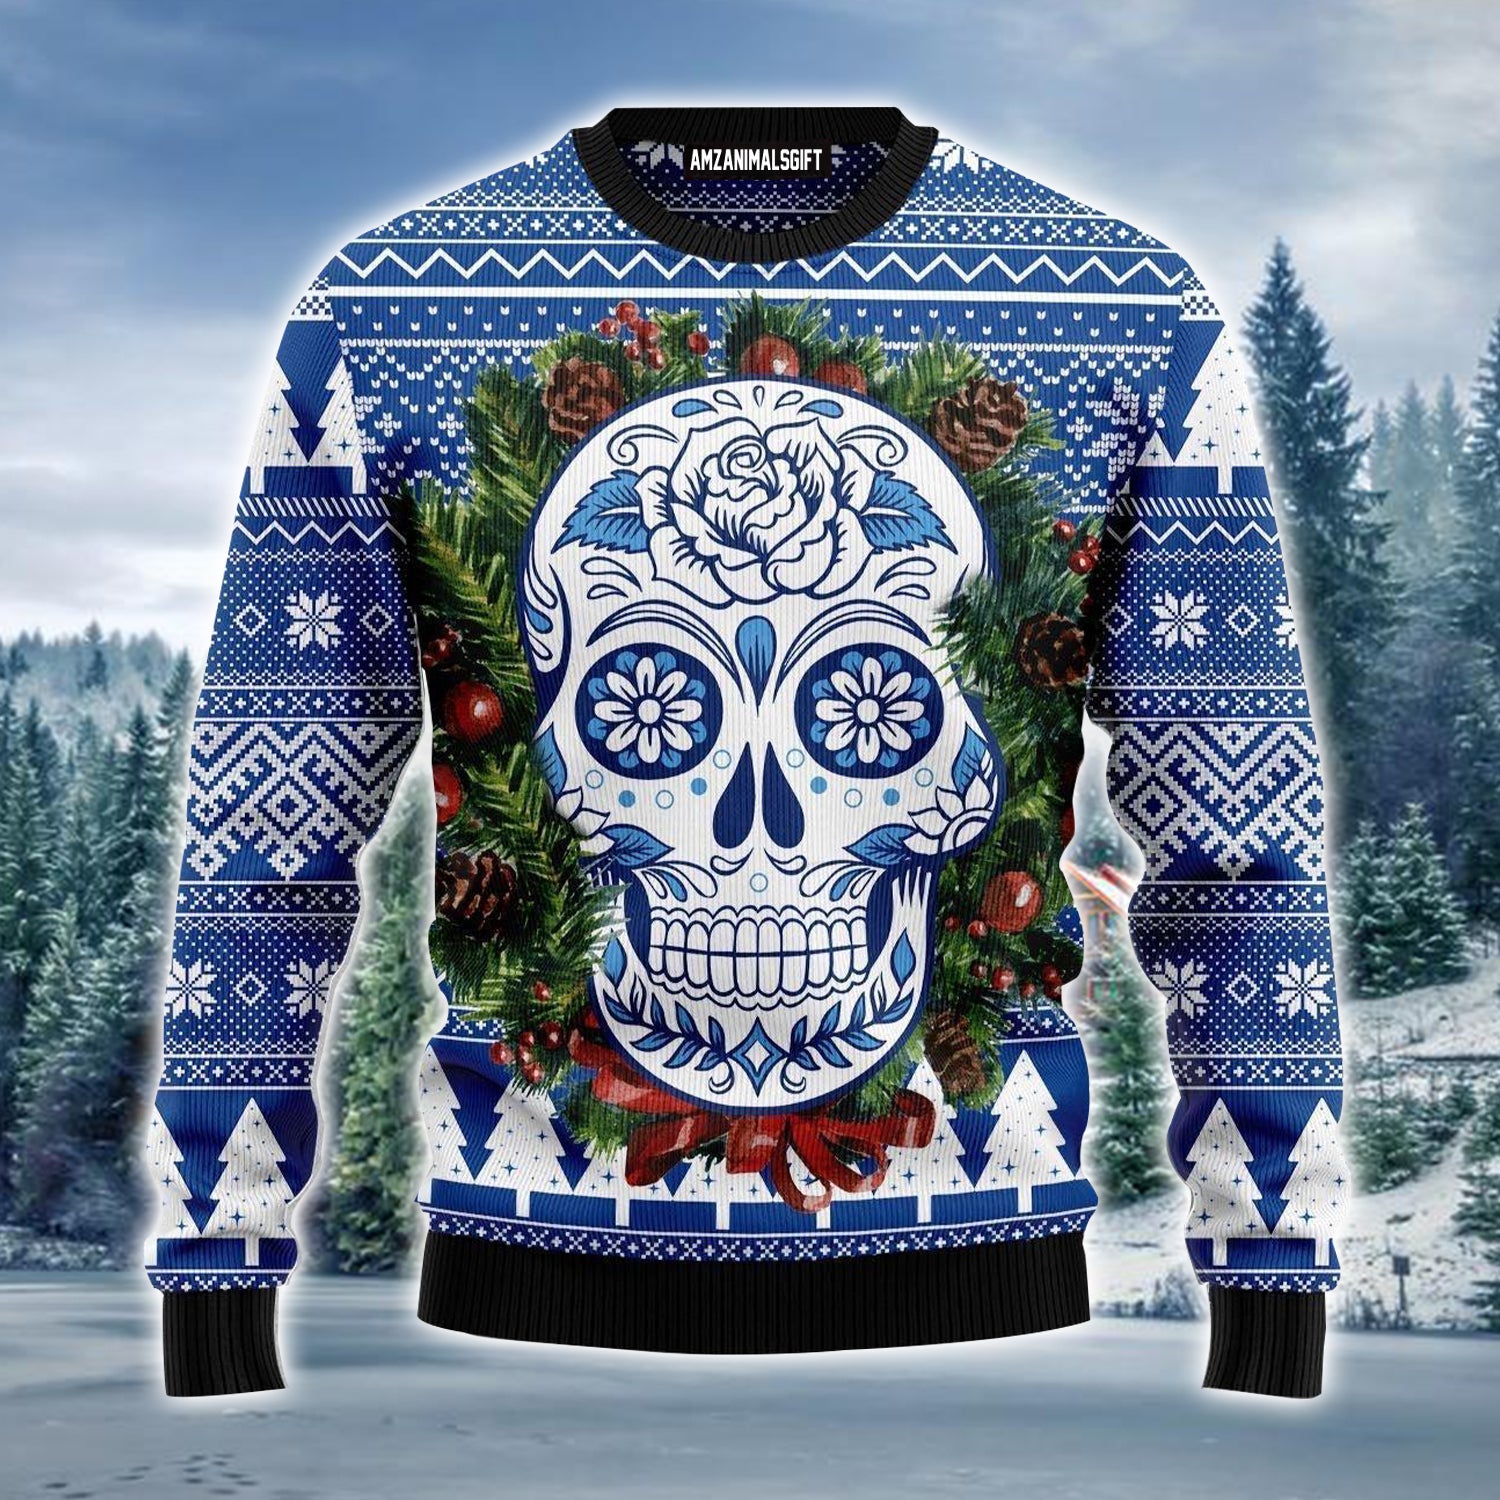 Awesome Sugar Skull Ugly Christmas Sweater, Flower Wreath Christmas Ugly Sweater For Men & Women - Perfect Gift For Christmas, Family, Friends